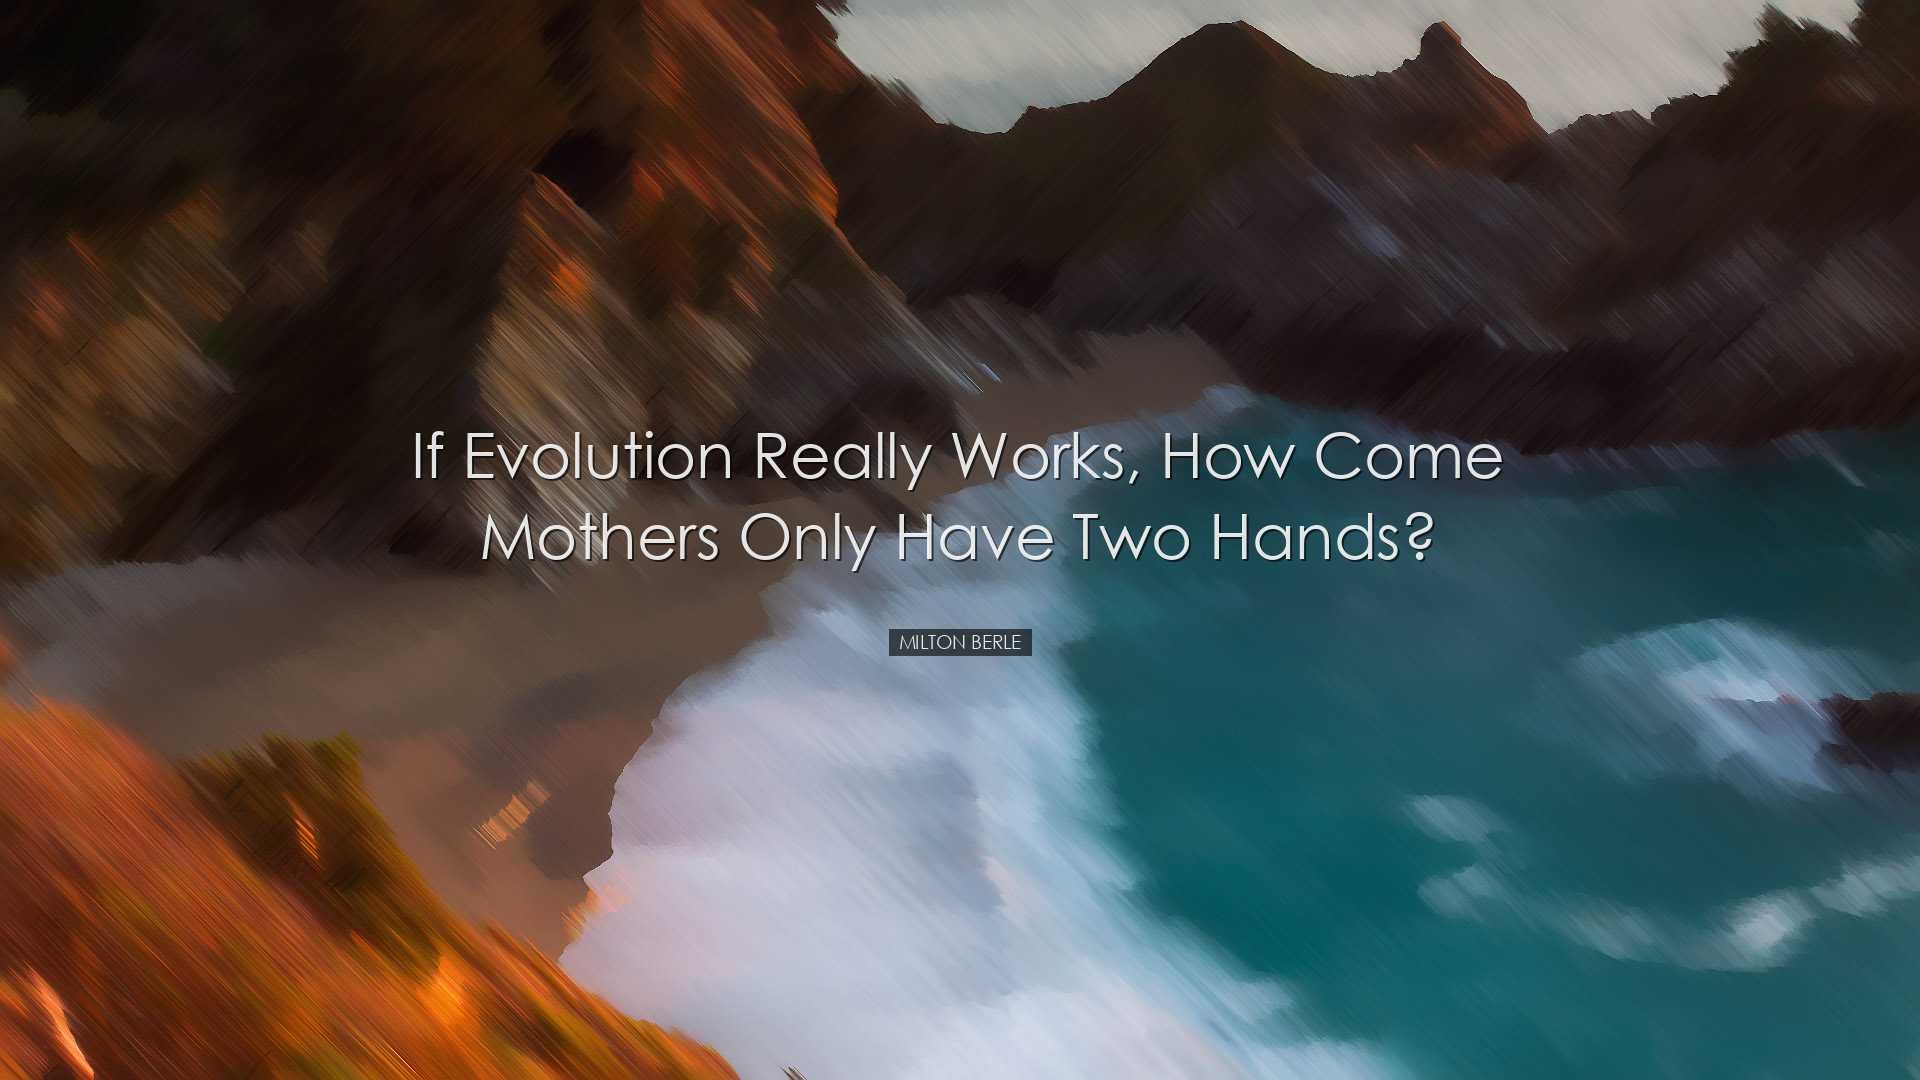 If evolution really works, how come mothers only have two hands? -